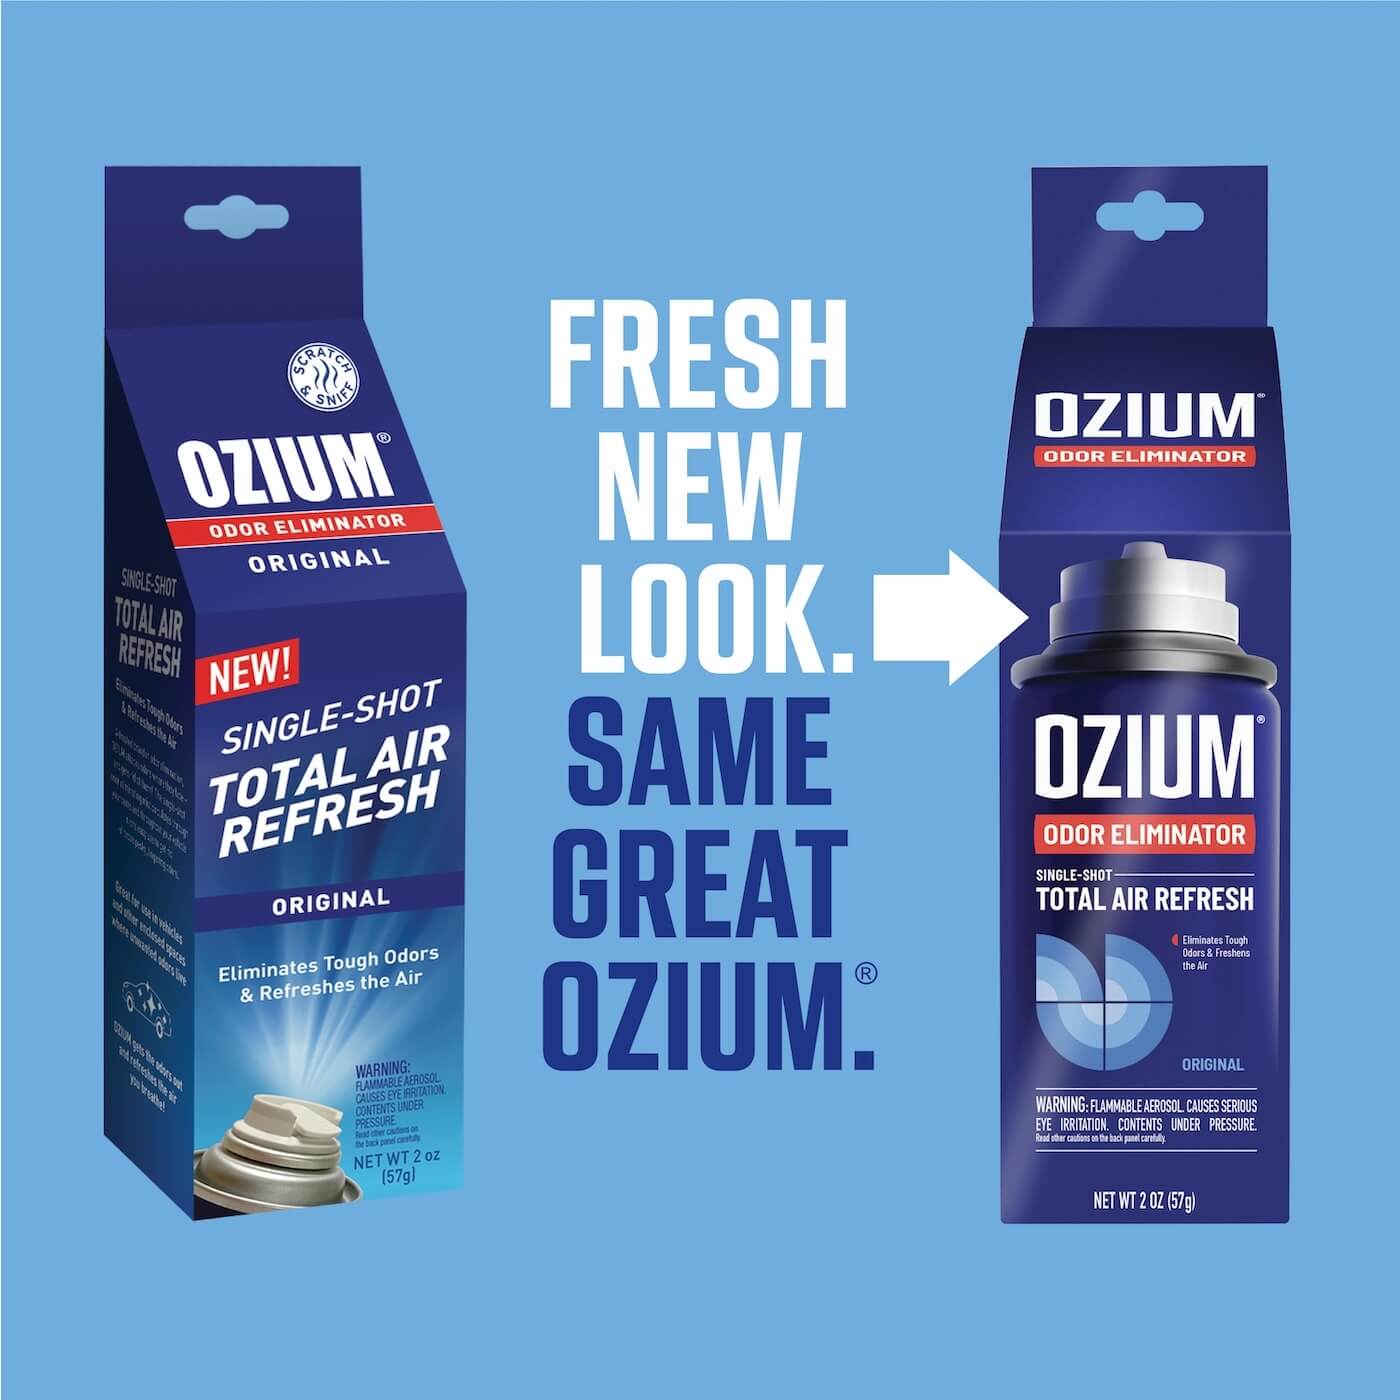 Fresh New Look. Same Great Ozium. A picture of old packaging and a picture of new packaging